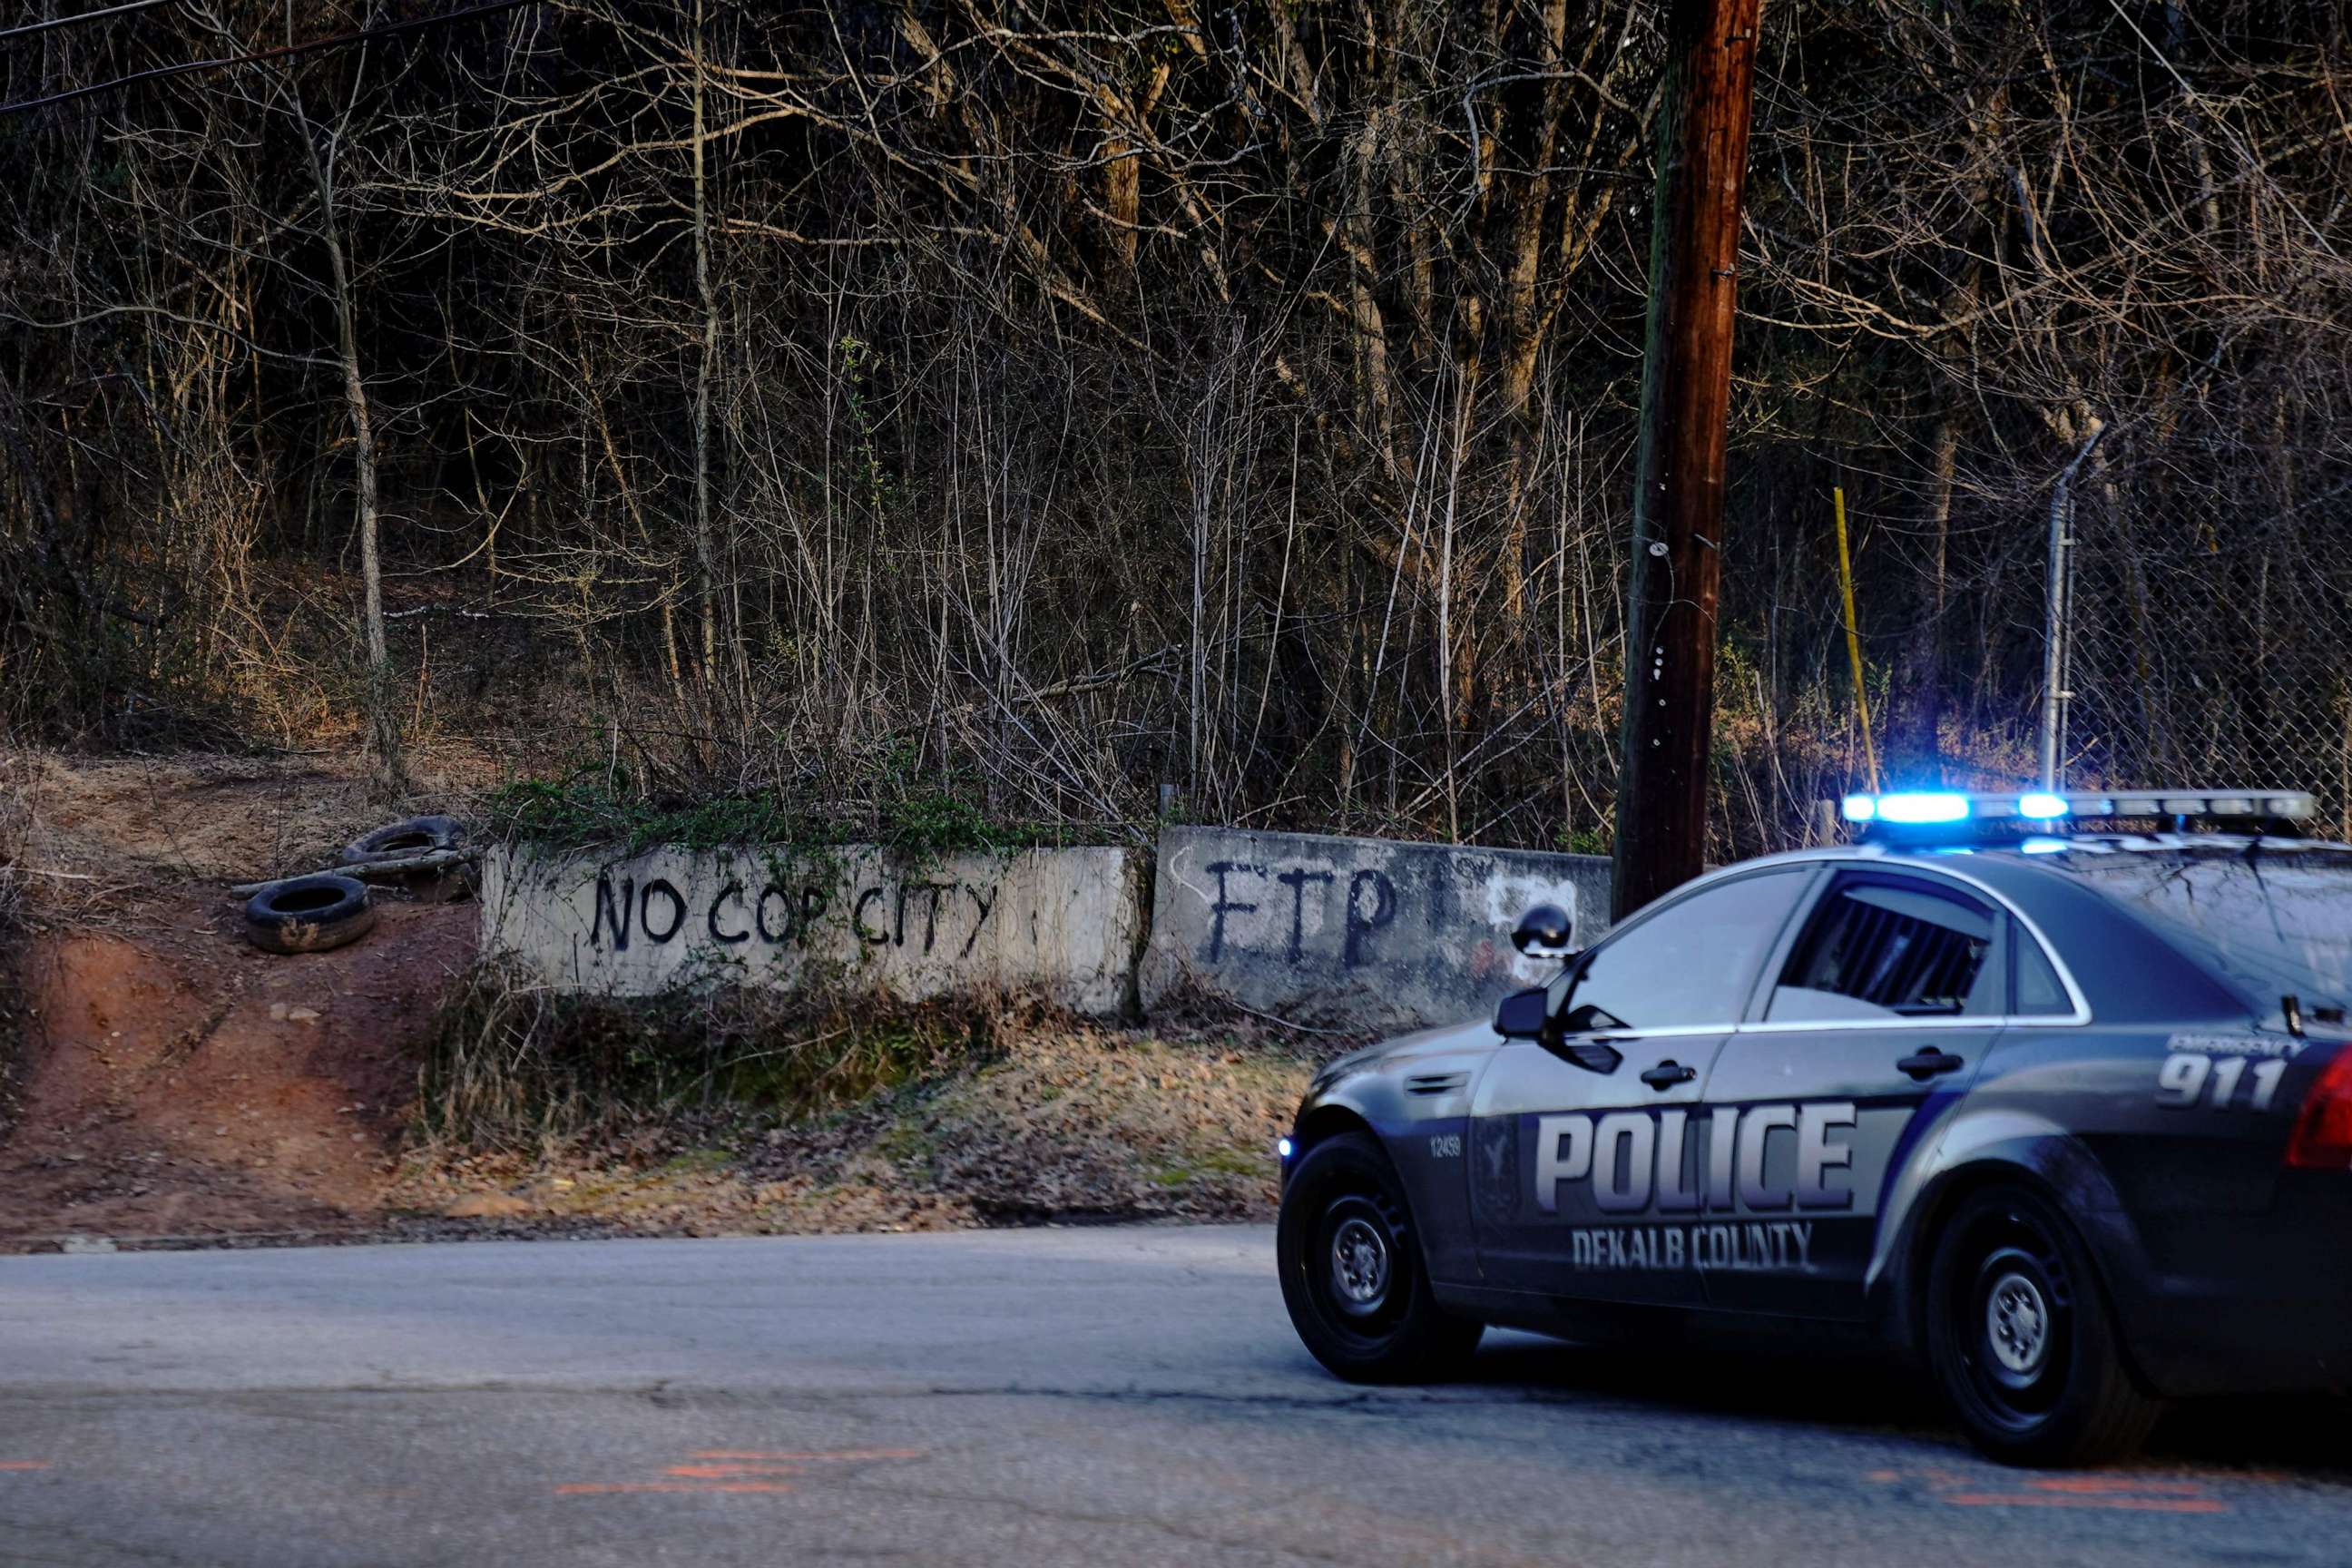 PHOTO: Police drive past the planned site of a public safety training facility that opponents have nicknamed "Cop City" near Atlanta, Georgia, on Feb. 6, 2023.